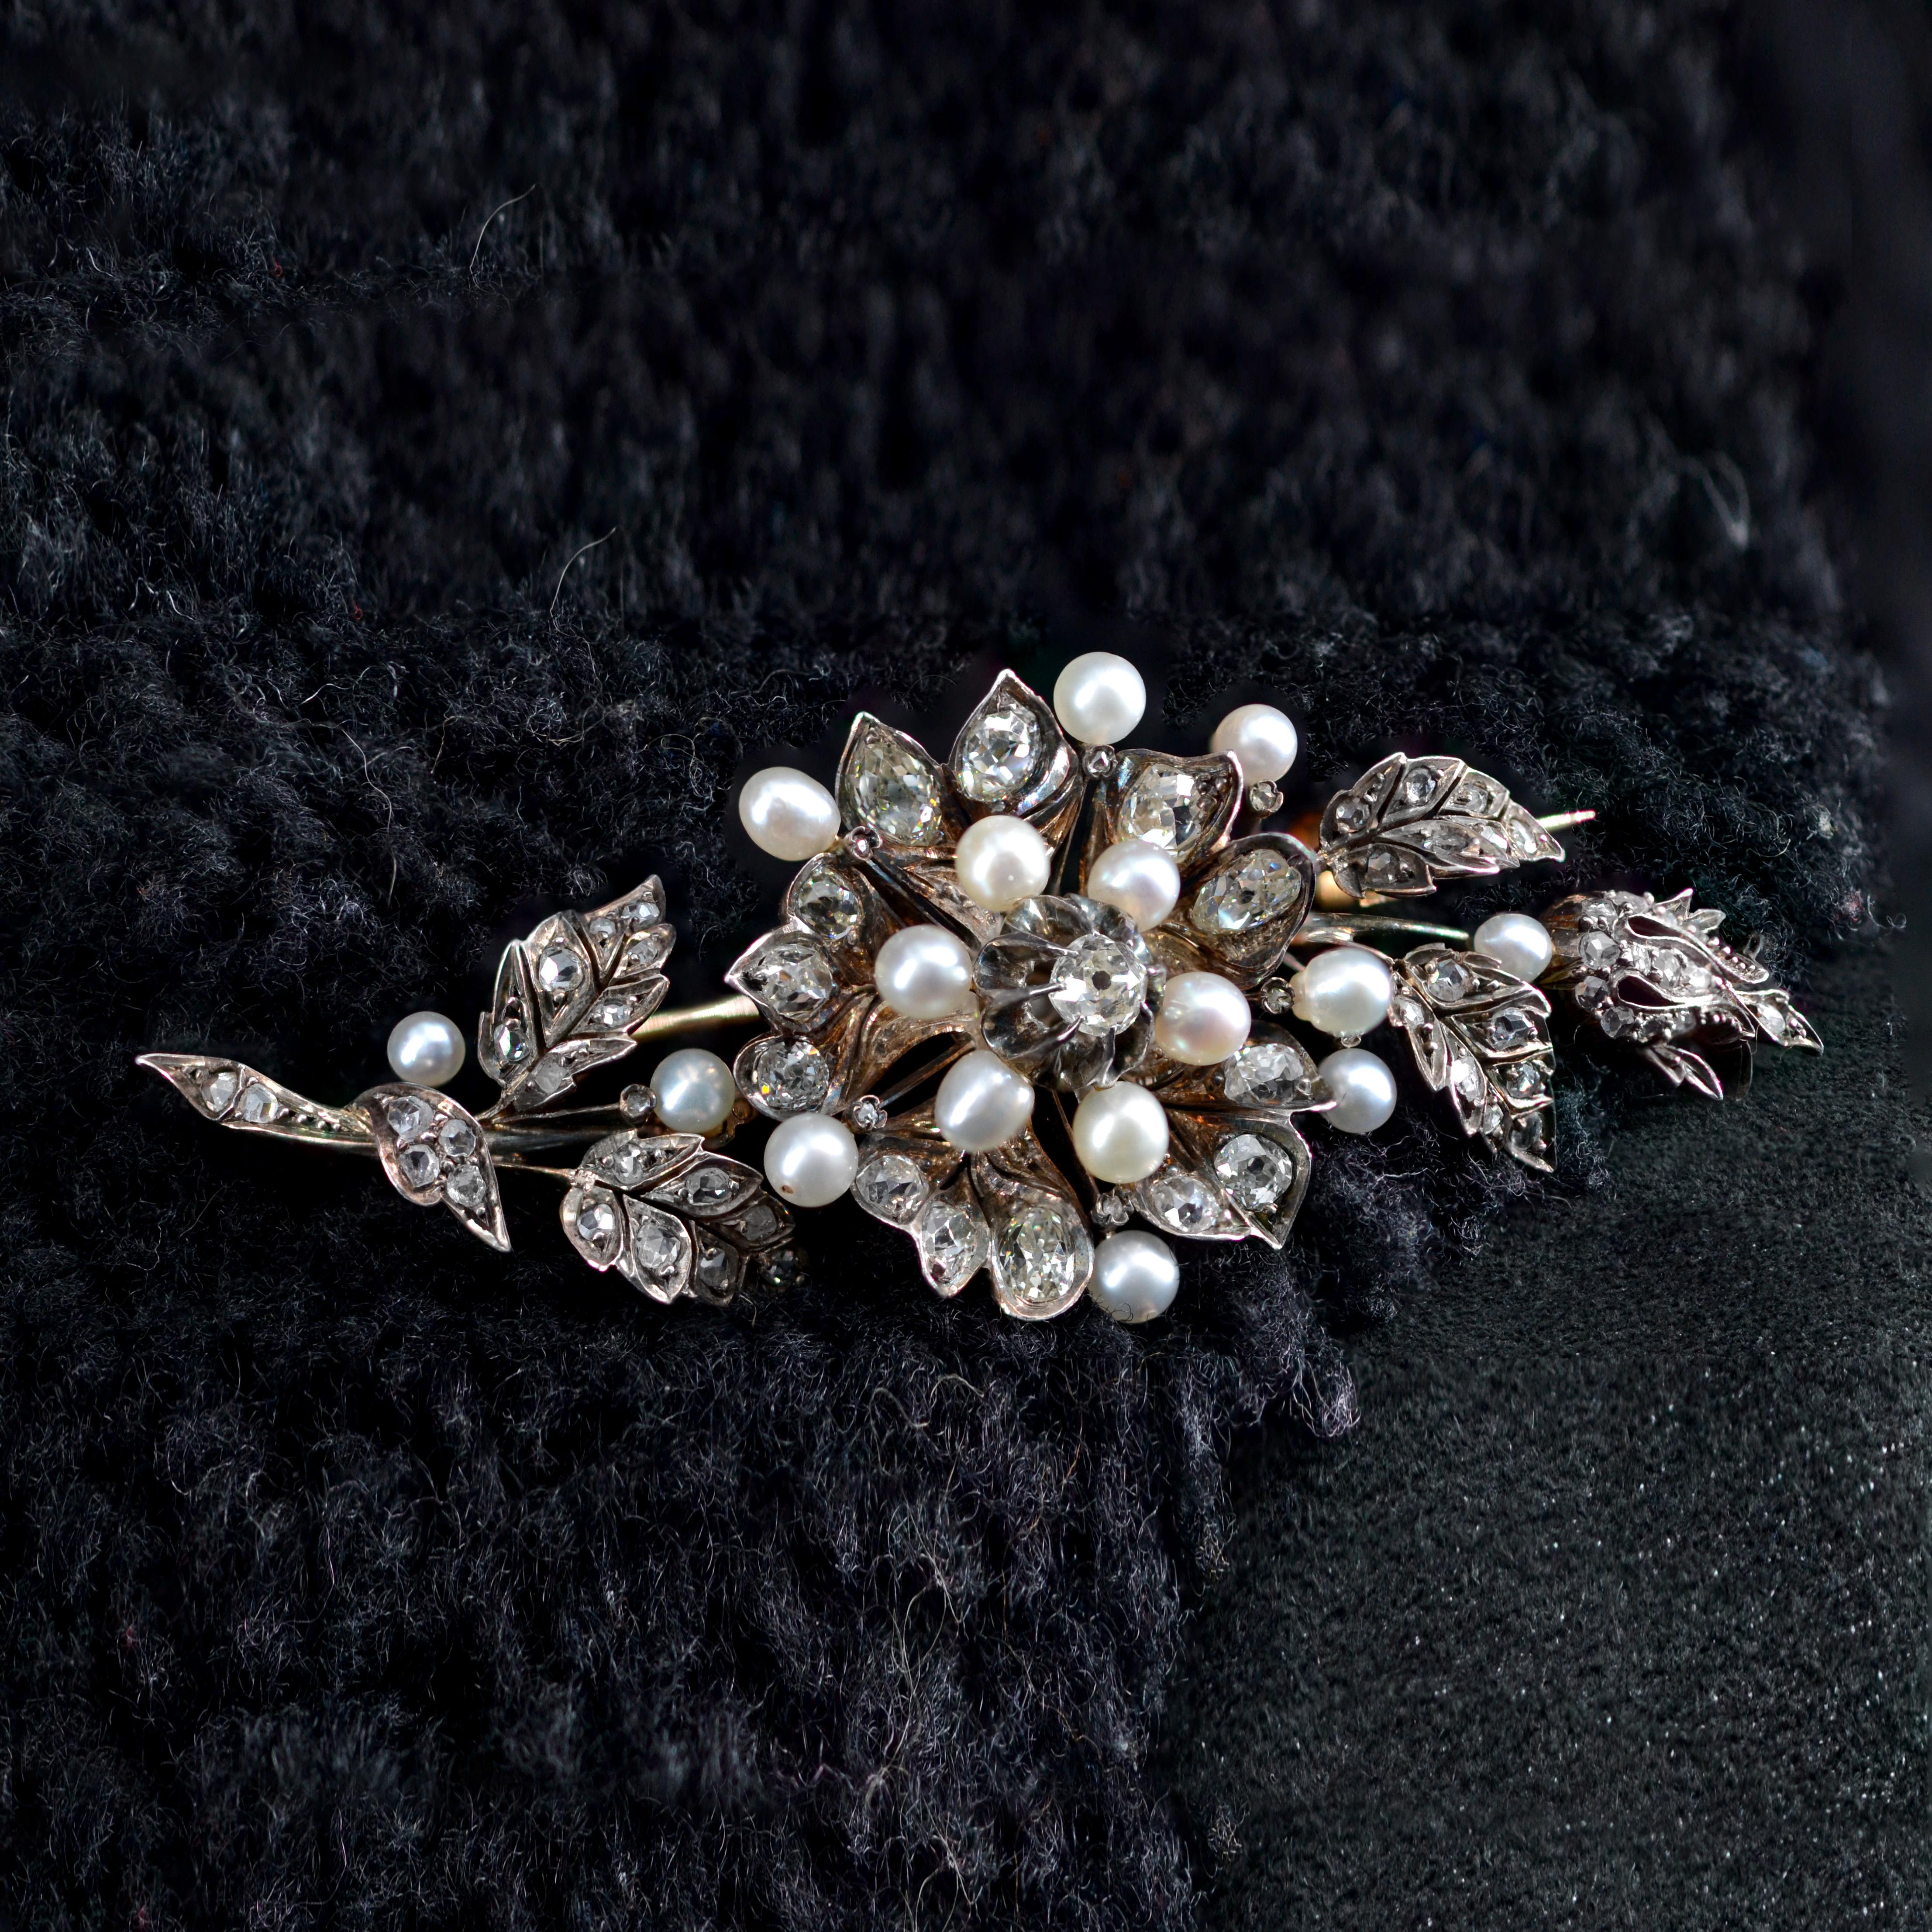 Napoleon III French 19th Century Fine Pearls Diamonds Shaking Brooch For Sale